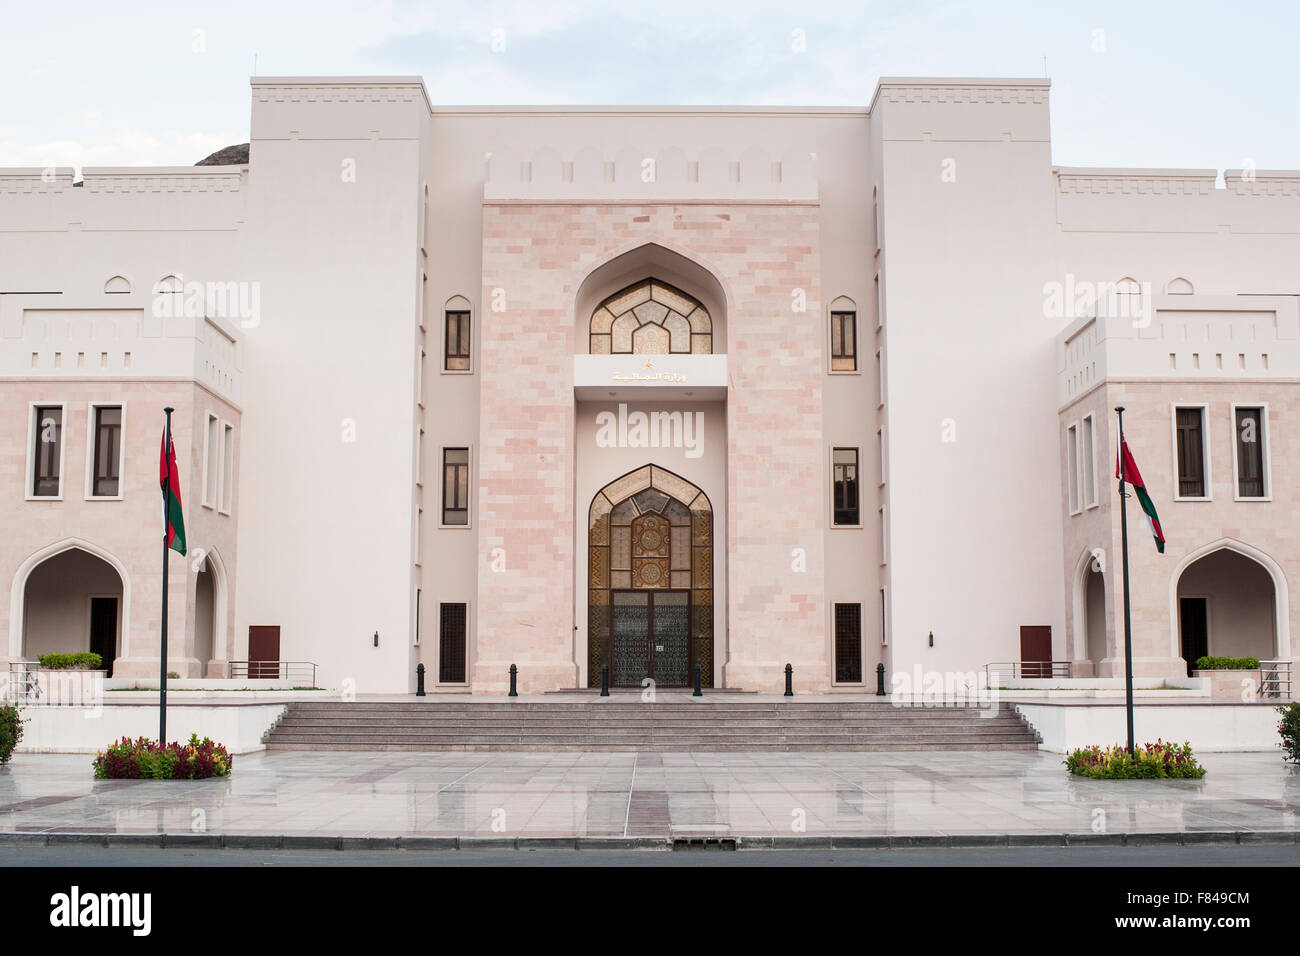 Facade of a government building in Old Muscat, part of the capital of the Sultanate of Oman. Stock Photo